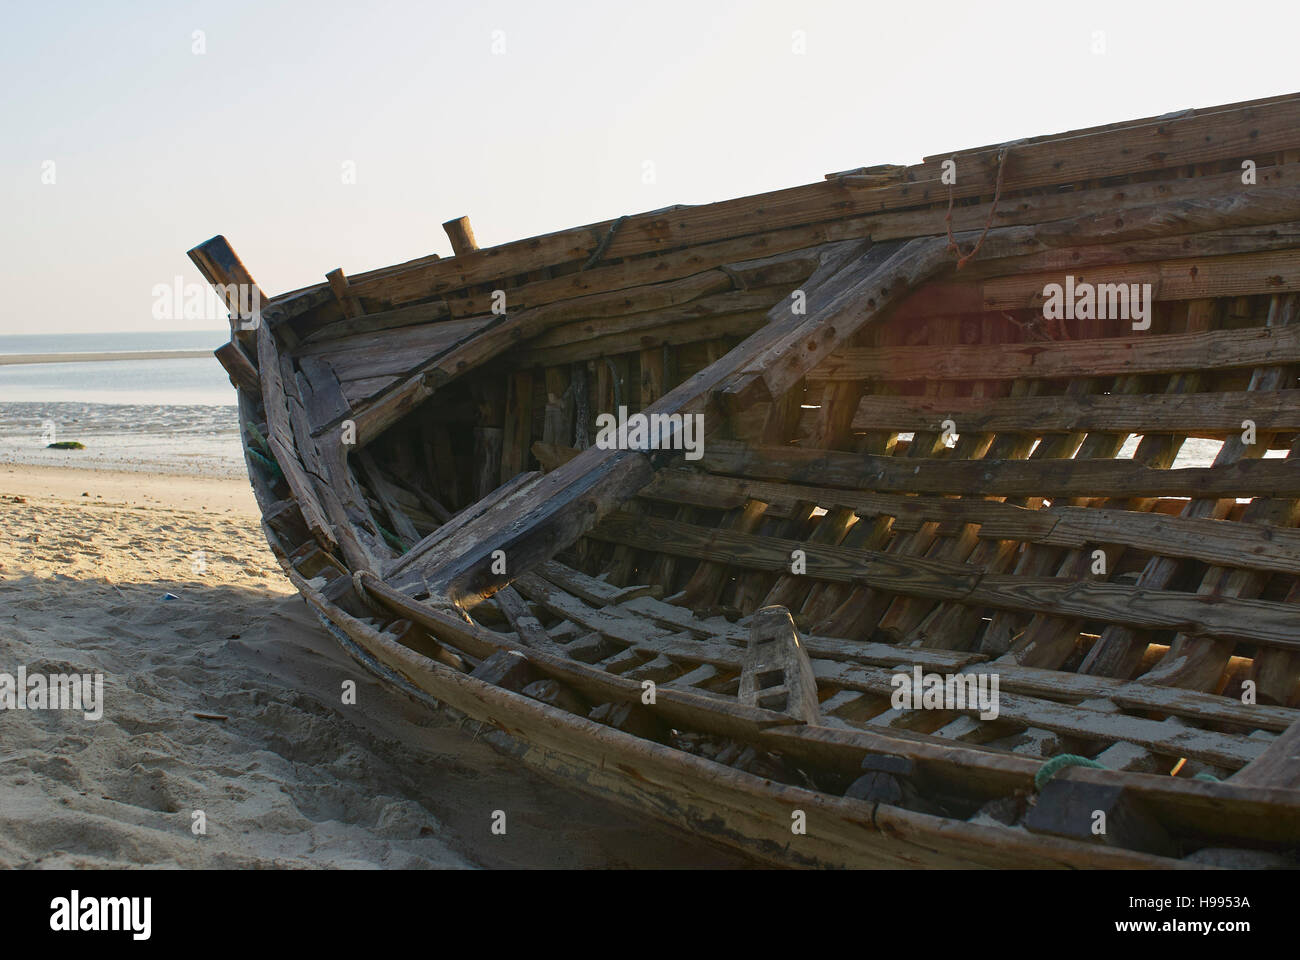 Dhow on the beach, out of service Stock Photo